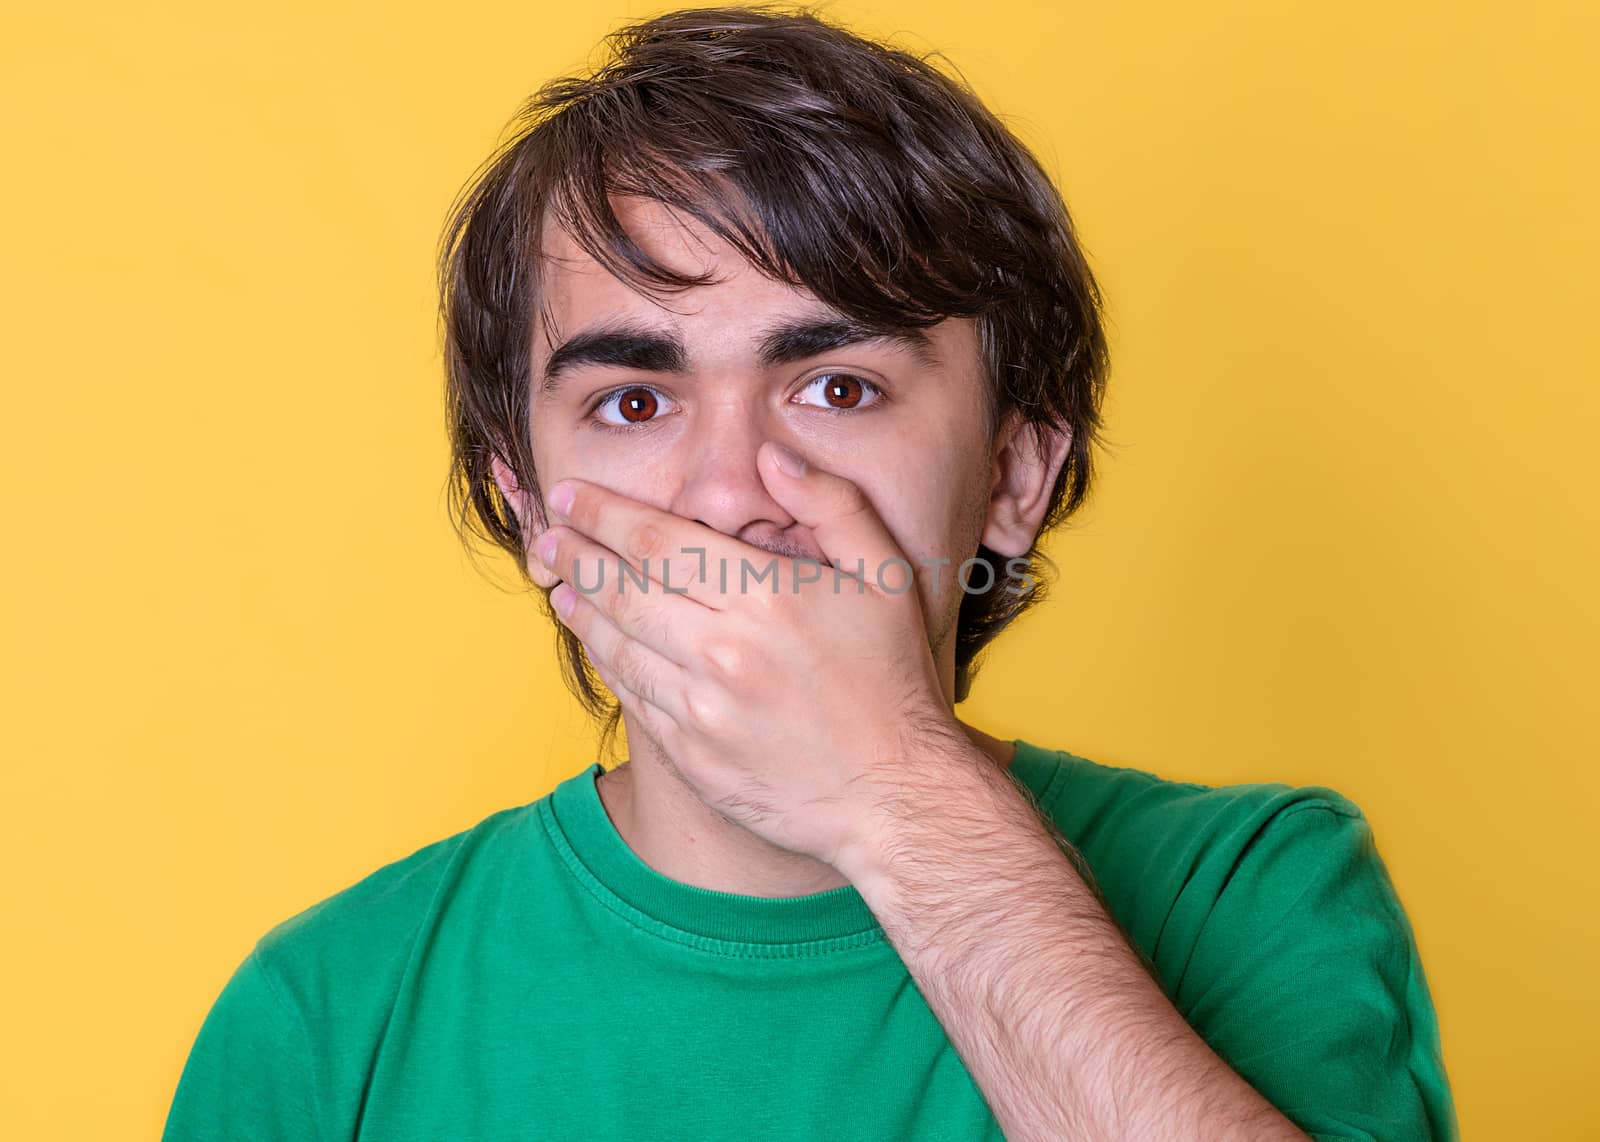 the young man putting his hand over his mouth on yellow background